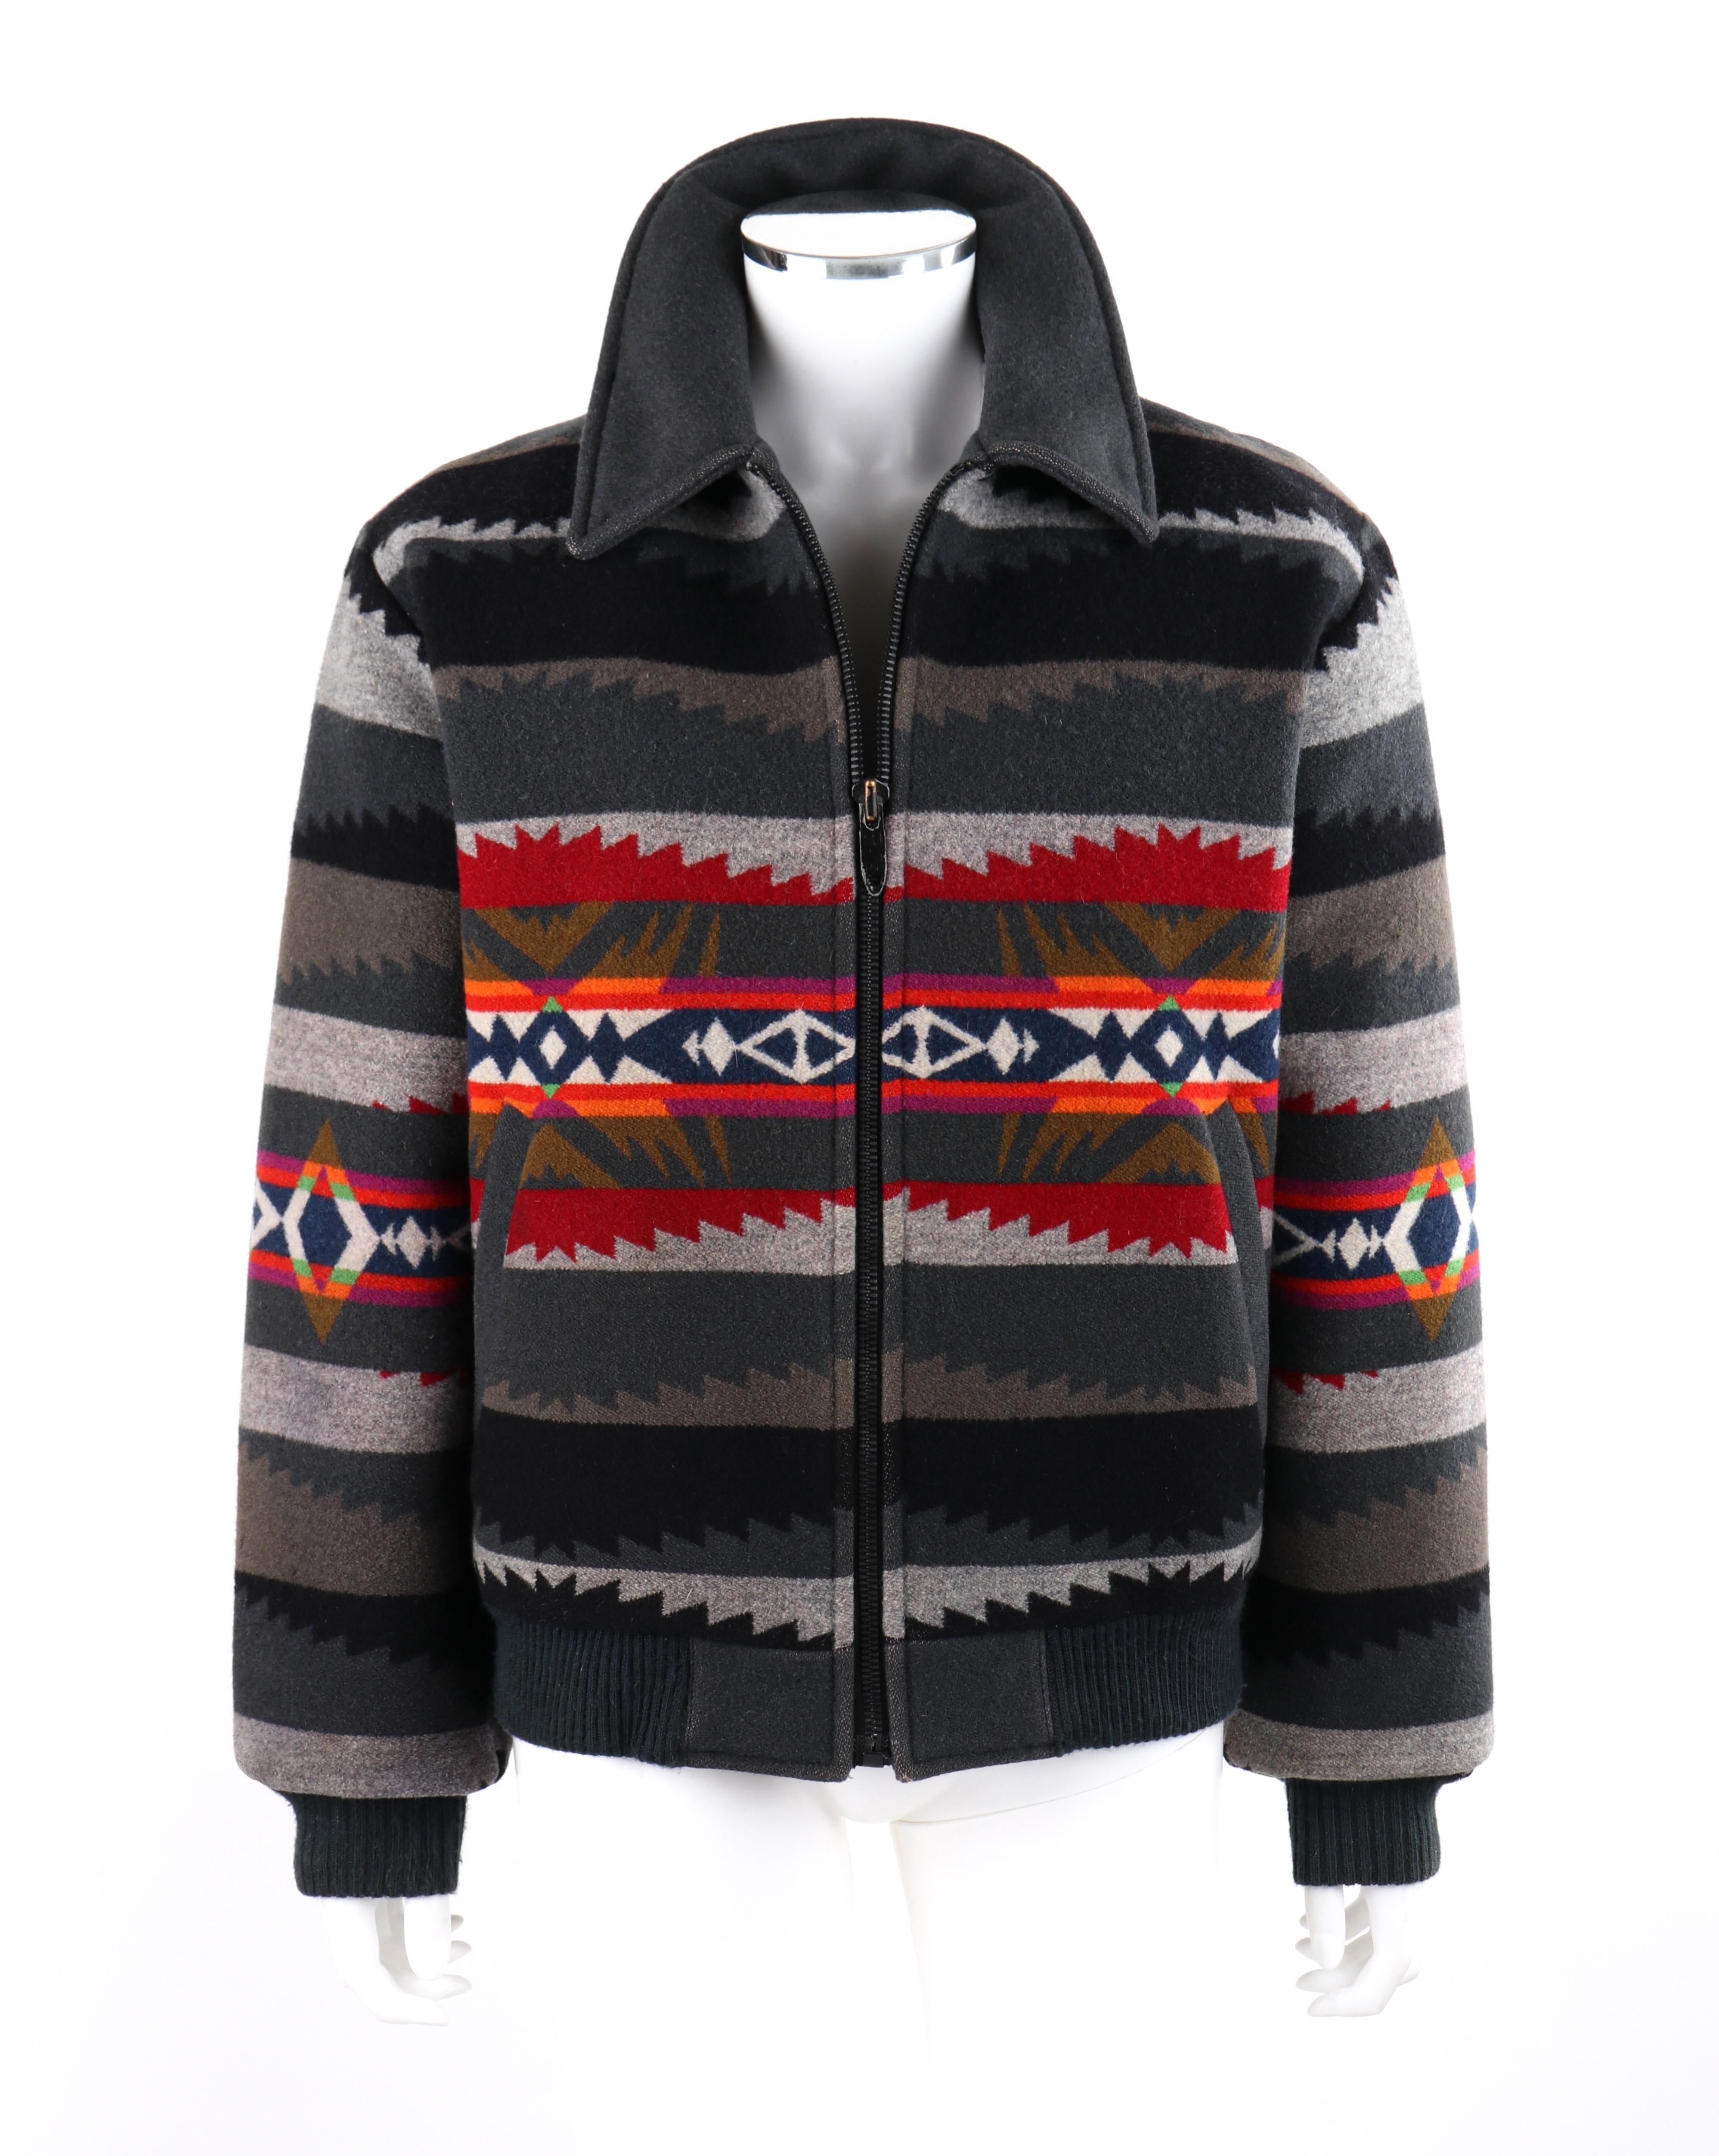 PENDLETON c.1990’s 'High Grade Westernwear' Multicolor Southwestern Print Jacket

Brand / Manufacturer:  Pendleton
Collection: High Grade Westernwear
Style: Jacket
Color(s): Shades of gray, red, orange purple, green, blue, brown, and black. 
Lined: